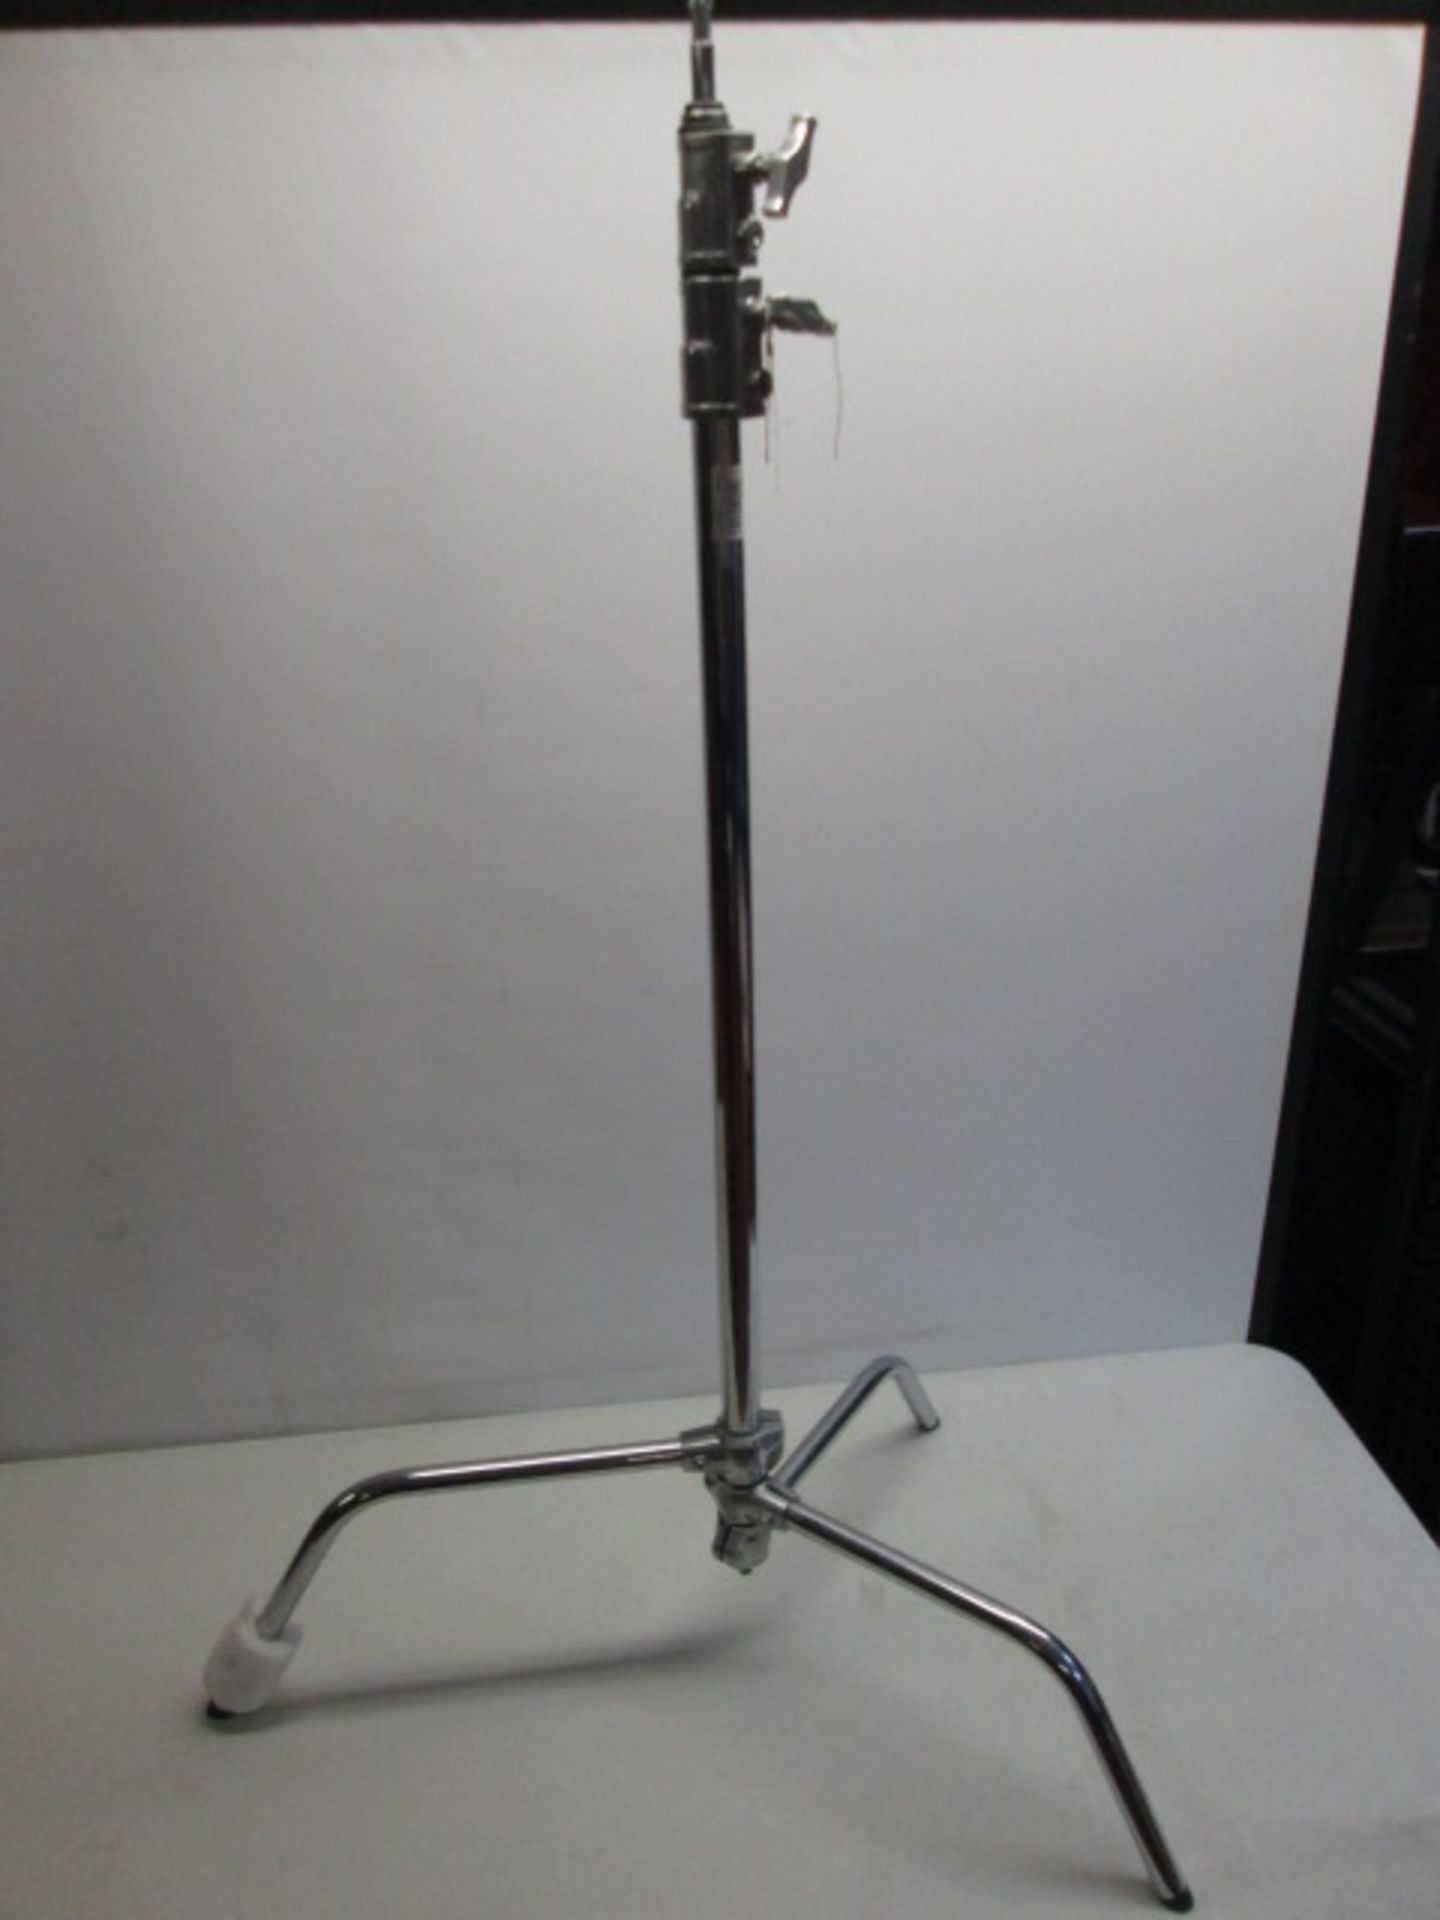 Kupo 40" C Stand w/Turtle Base. Exhibition Light Stand in Chrome. Comes with 2 x KS-062 16mm - Image 2 of 5